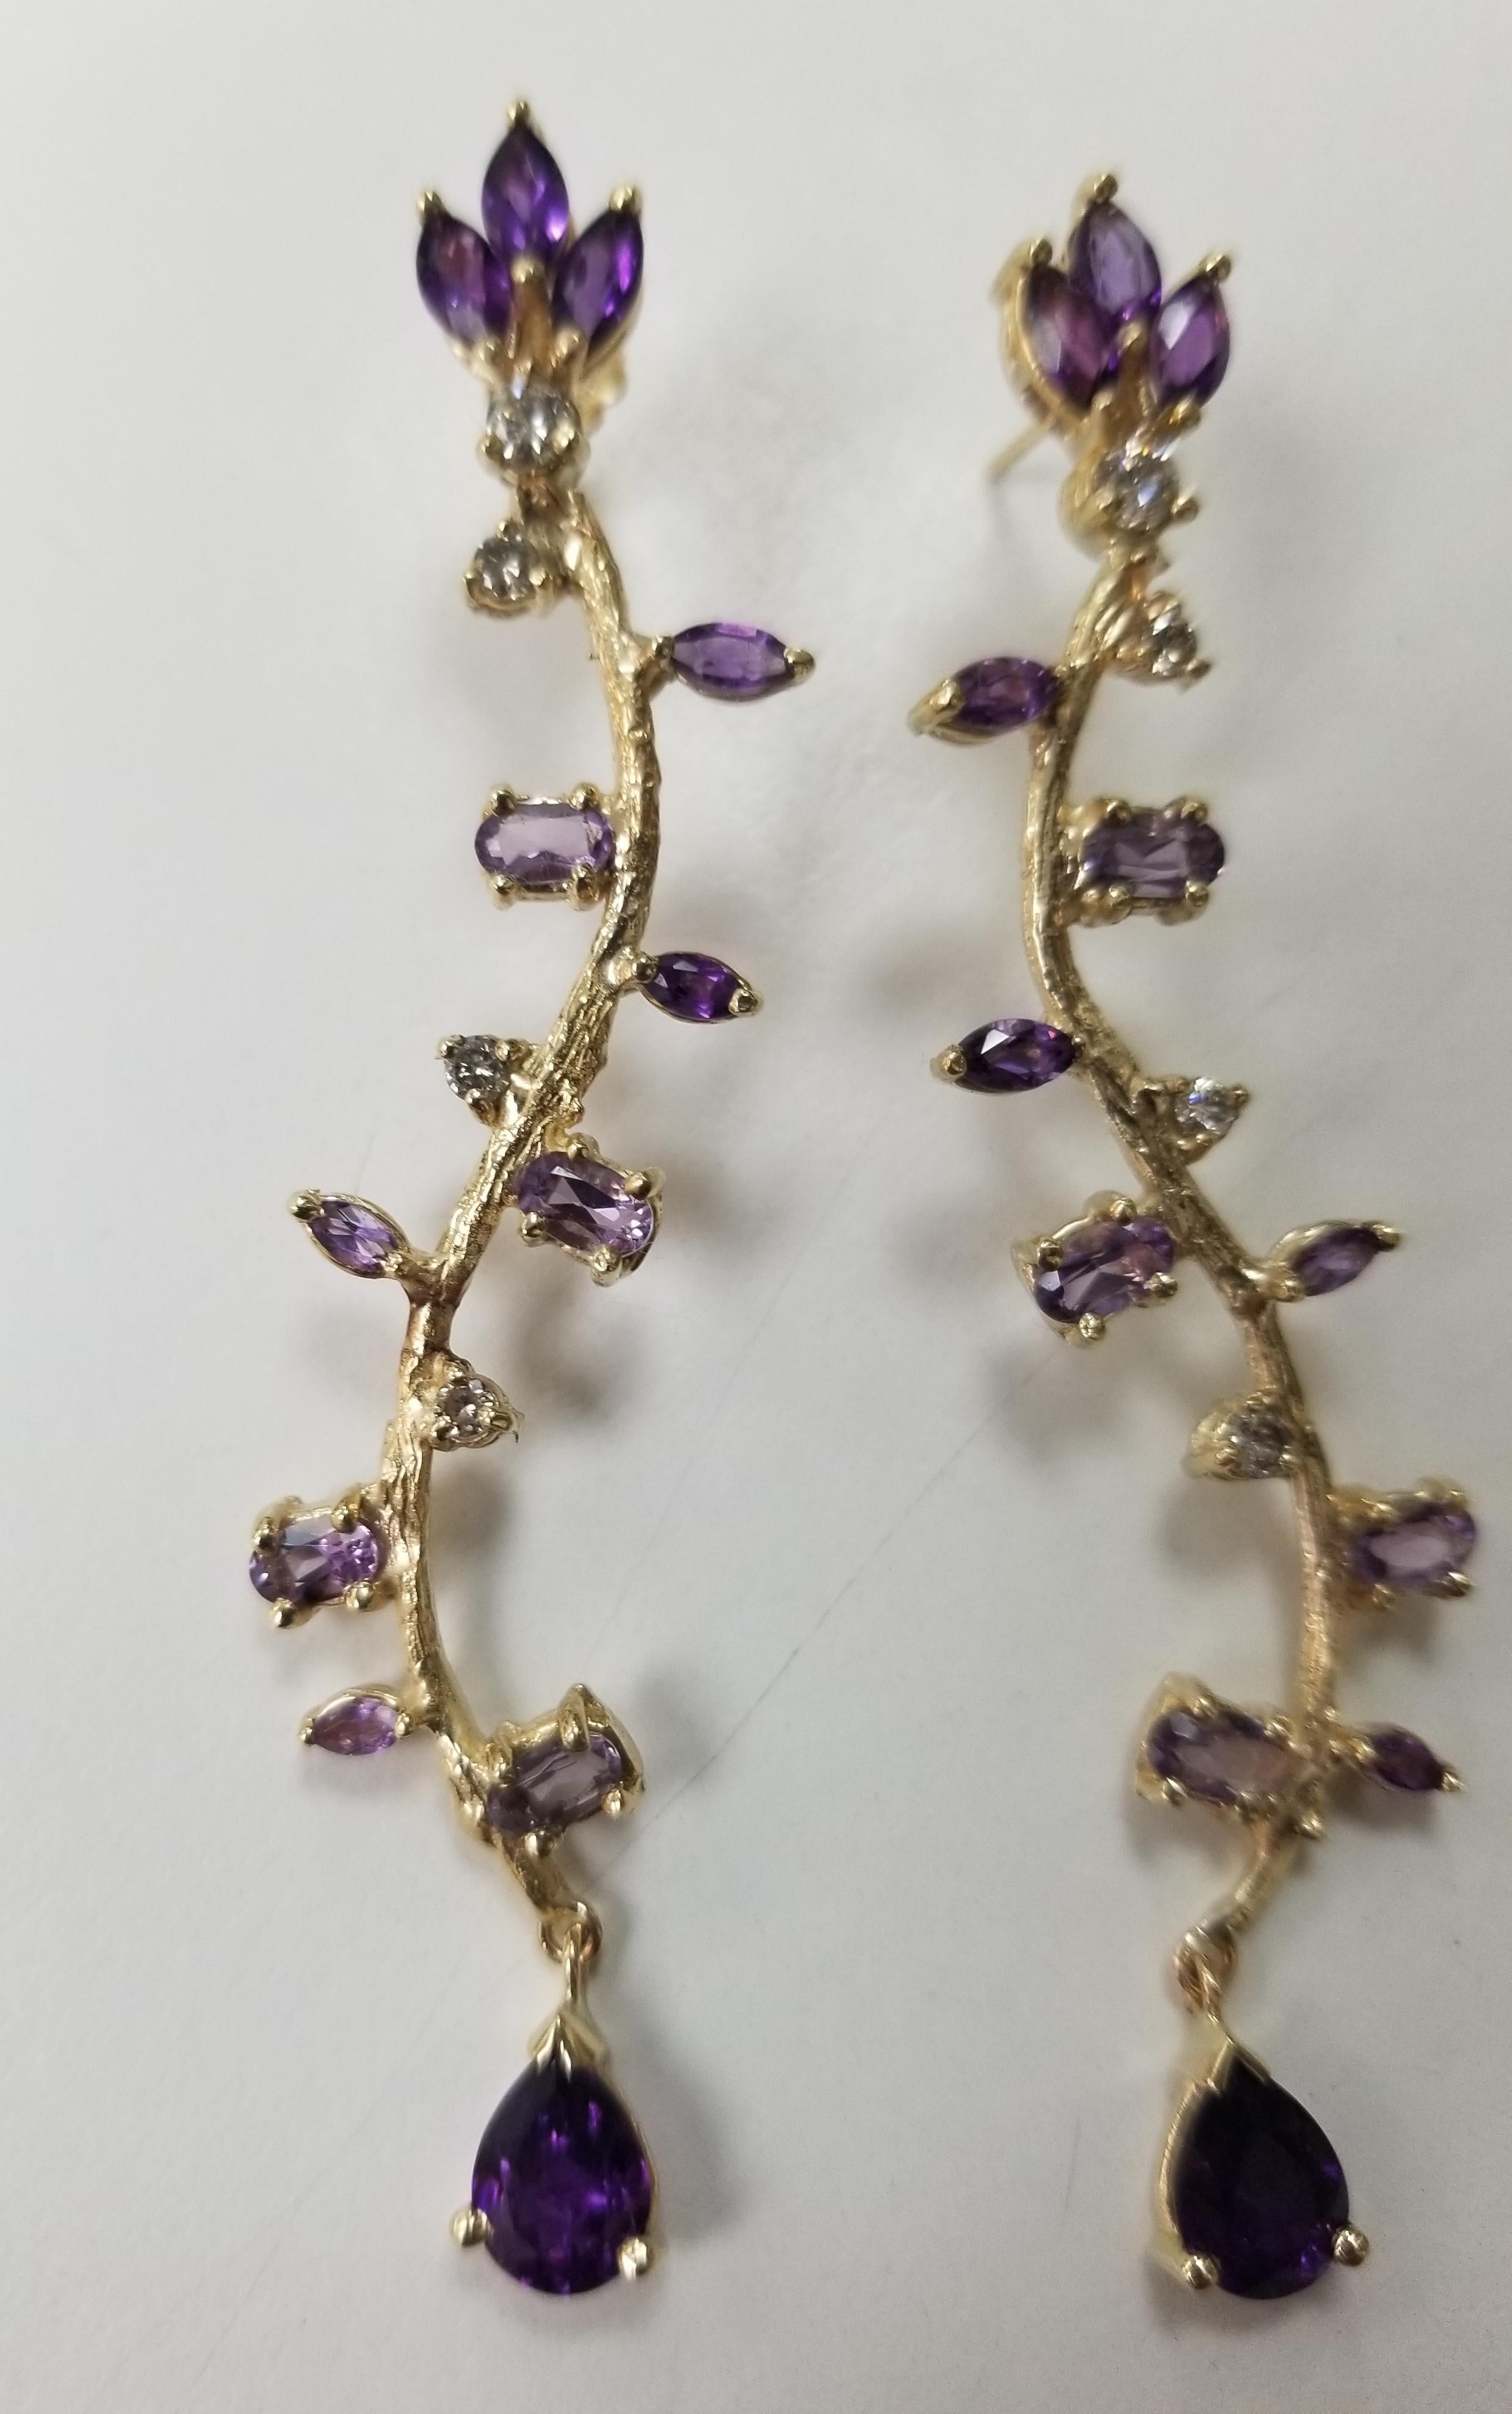 14k yellow gold Gresha signature bark and leaf with diamonds .55pts. and amethyst weighing 5.55cts.  There is a right and left ear, these are a beautiful dangle earring measuring 3 inches and weighing 11.90grams.

*this design is ours and can be